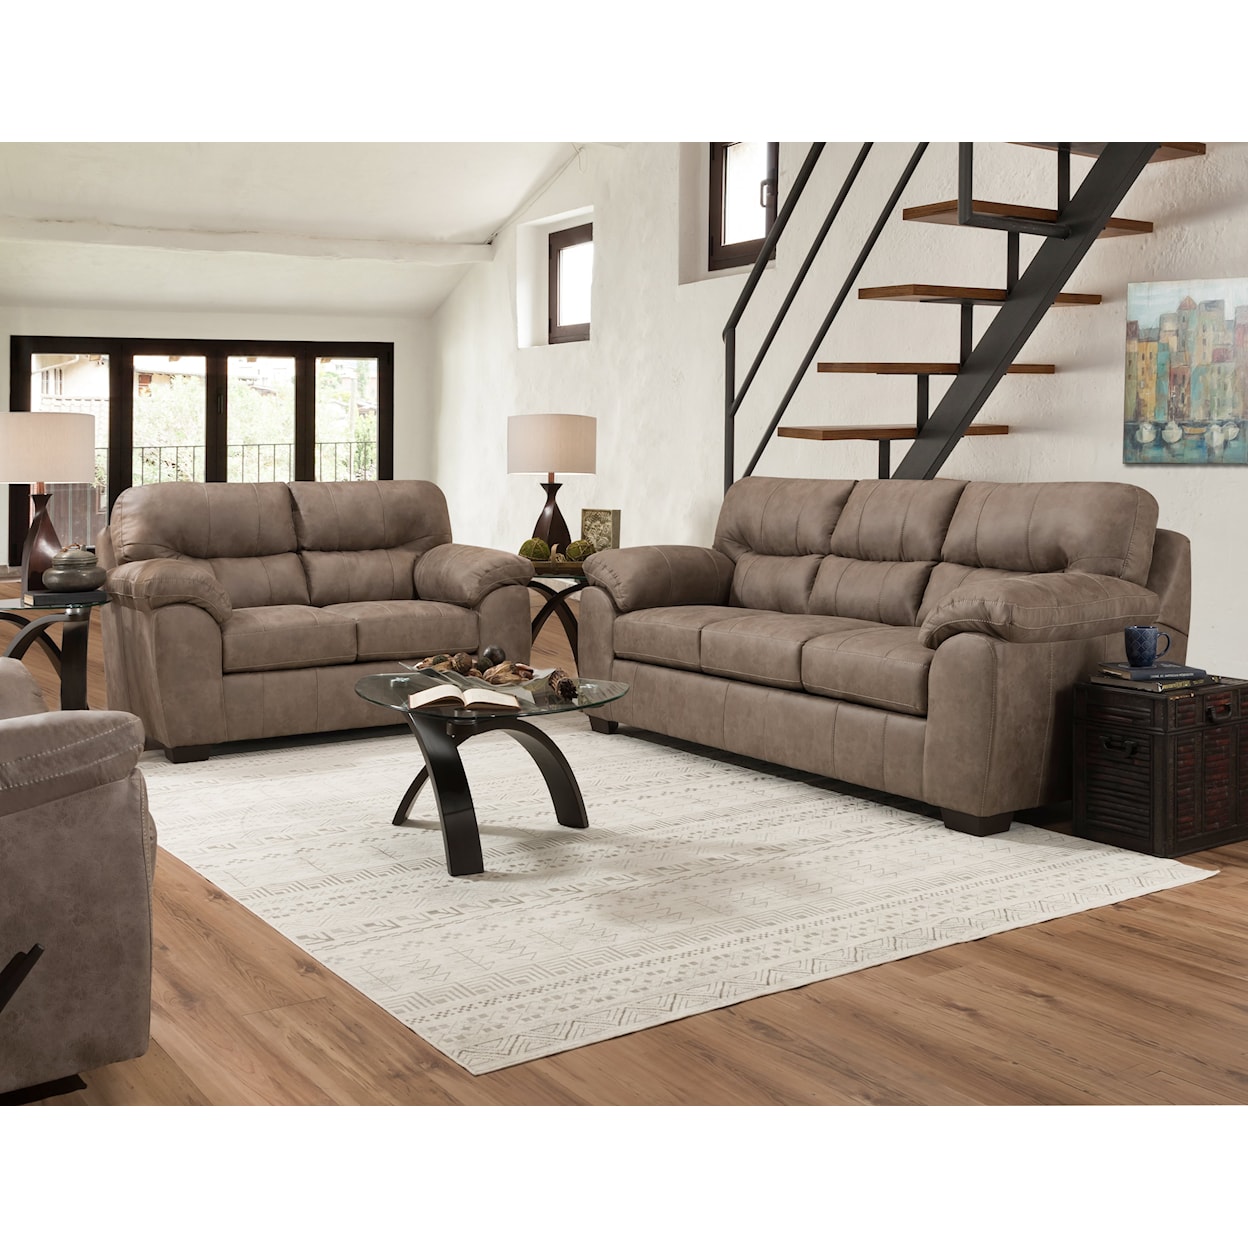 Peak Living 1780 Recliner Recliner with Pillow Arms